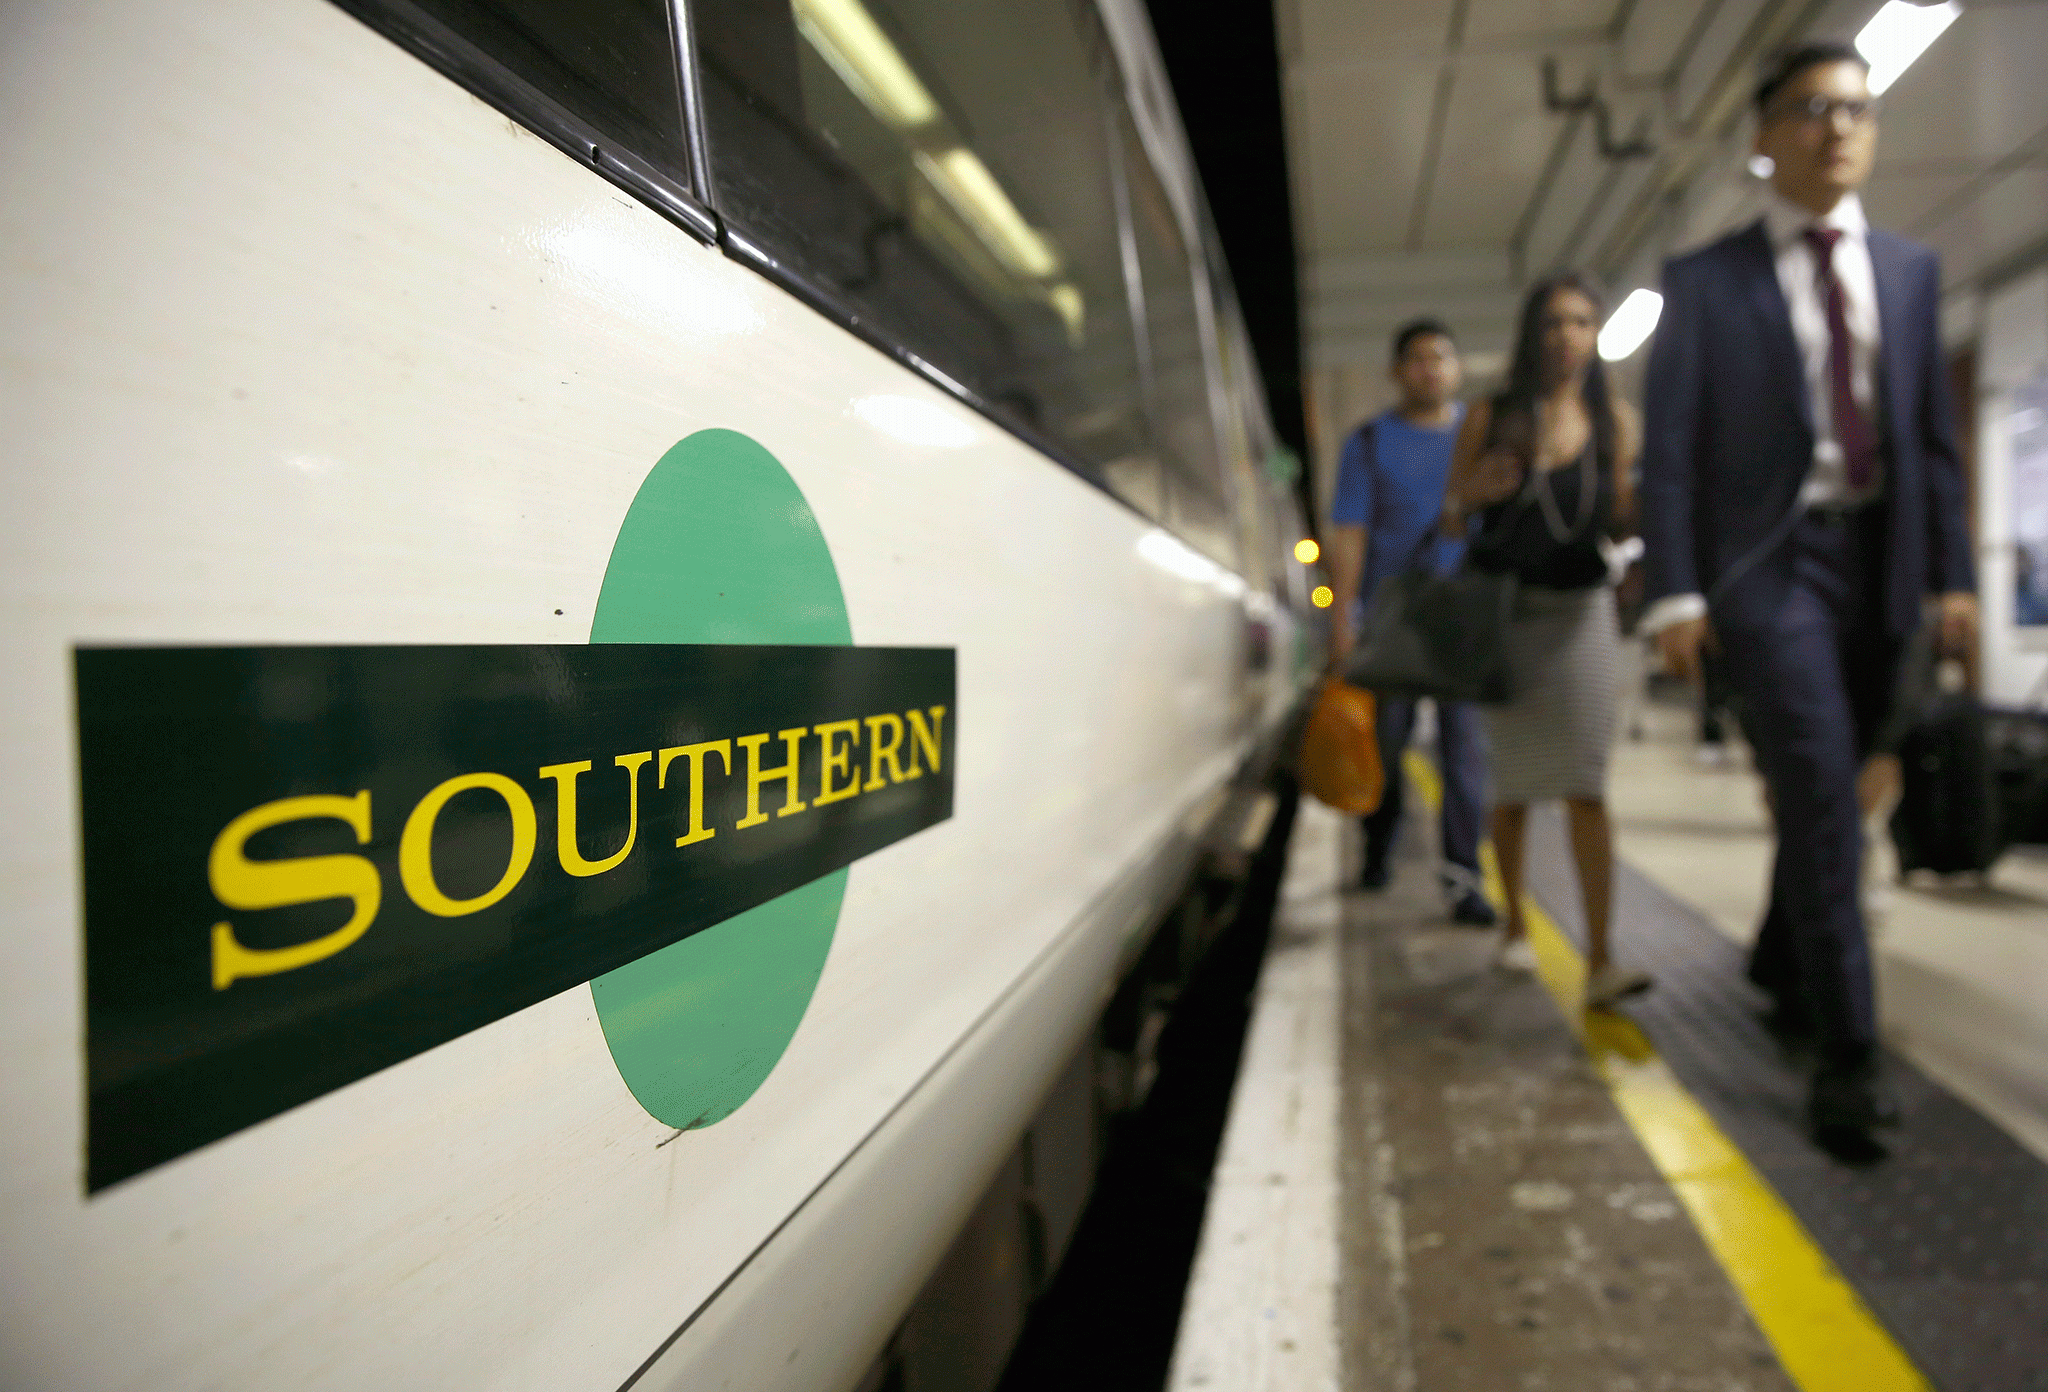 Read more

Southern Rail owner profits hit £100m one day after £20m 'bailout'